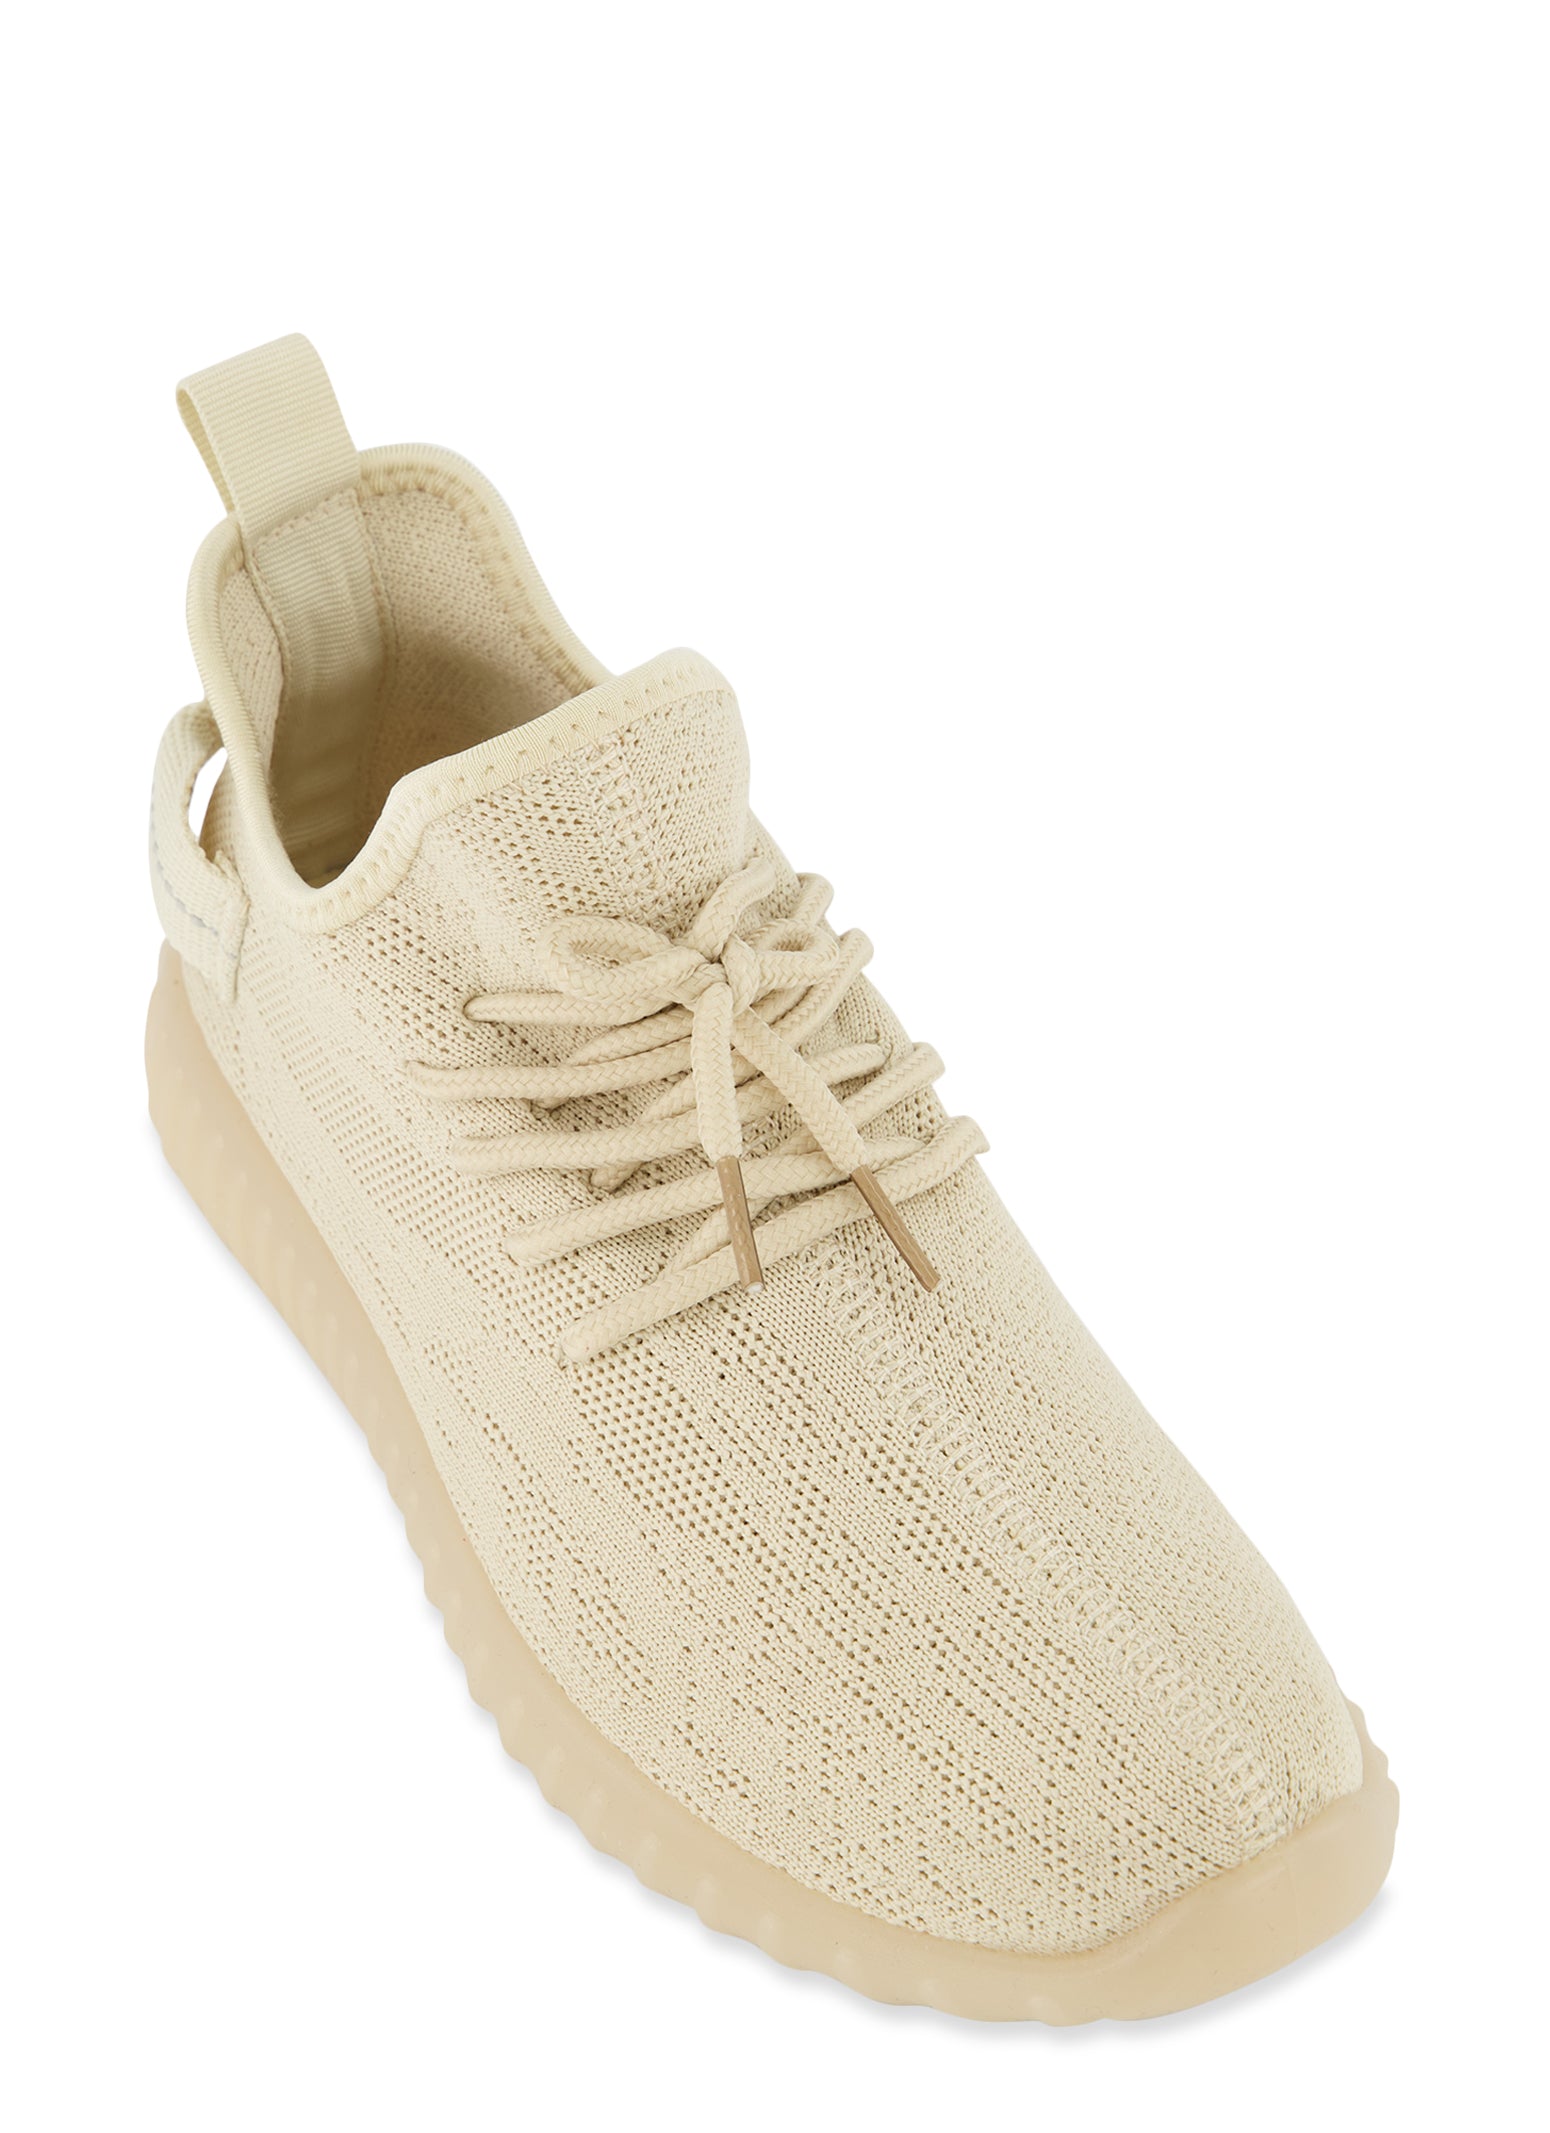 Textured Knit Lace Up Sneakers